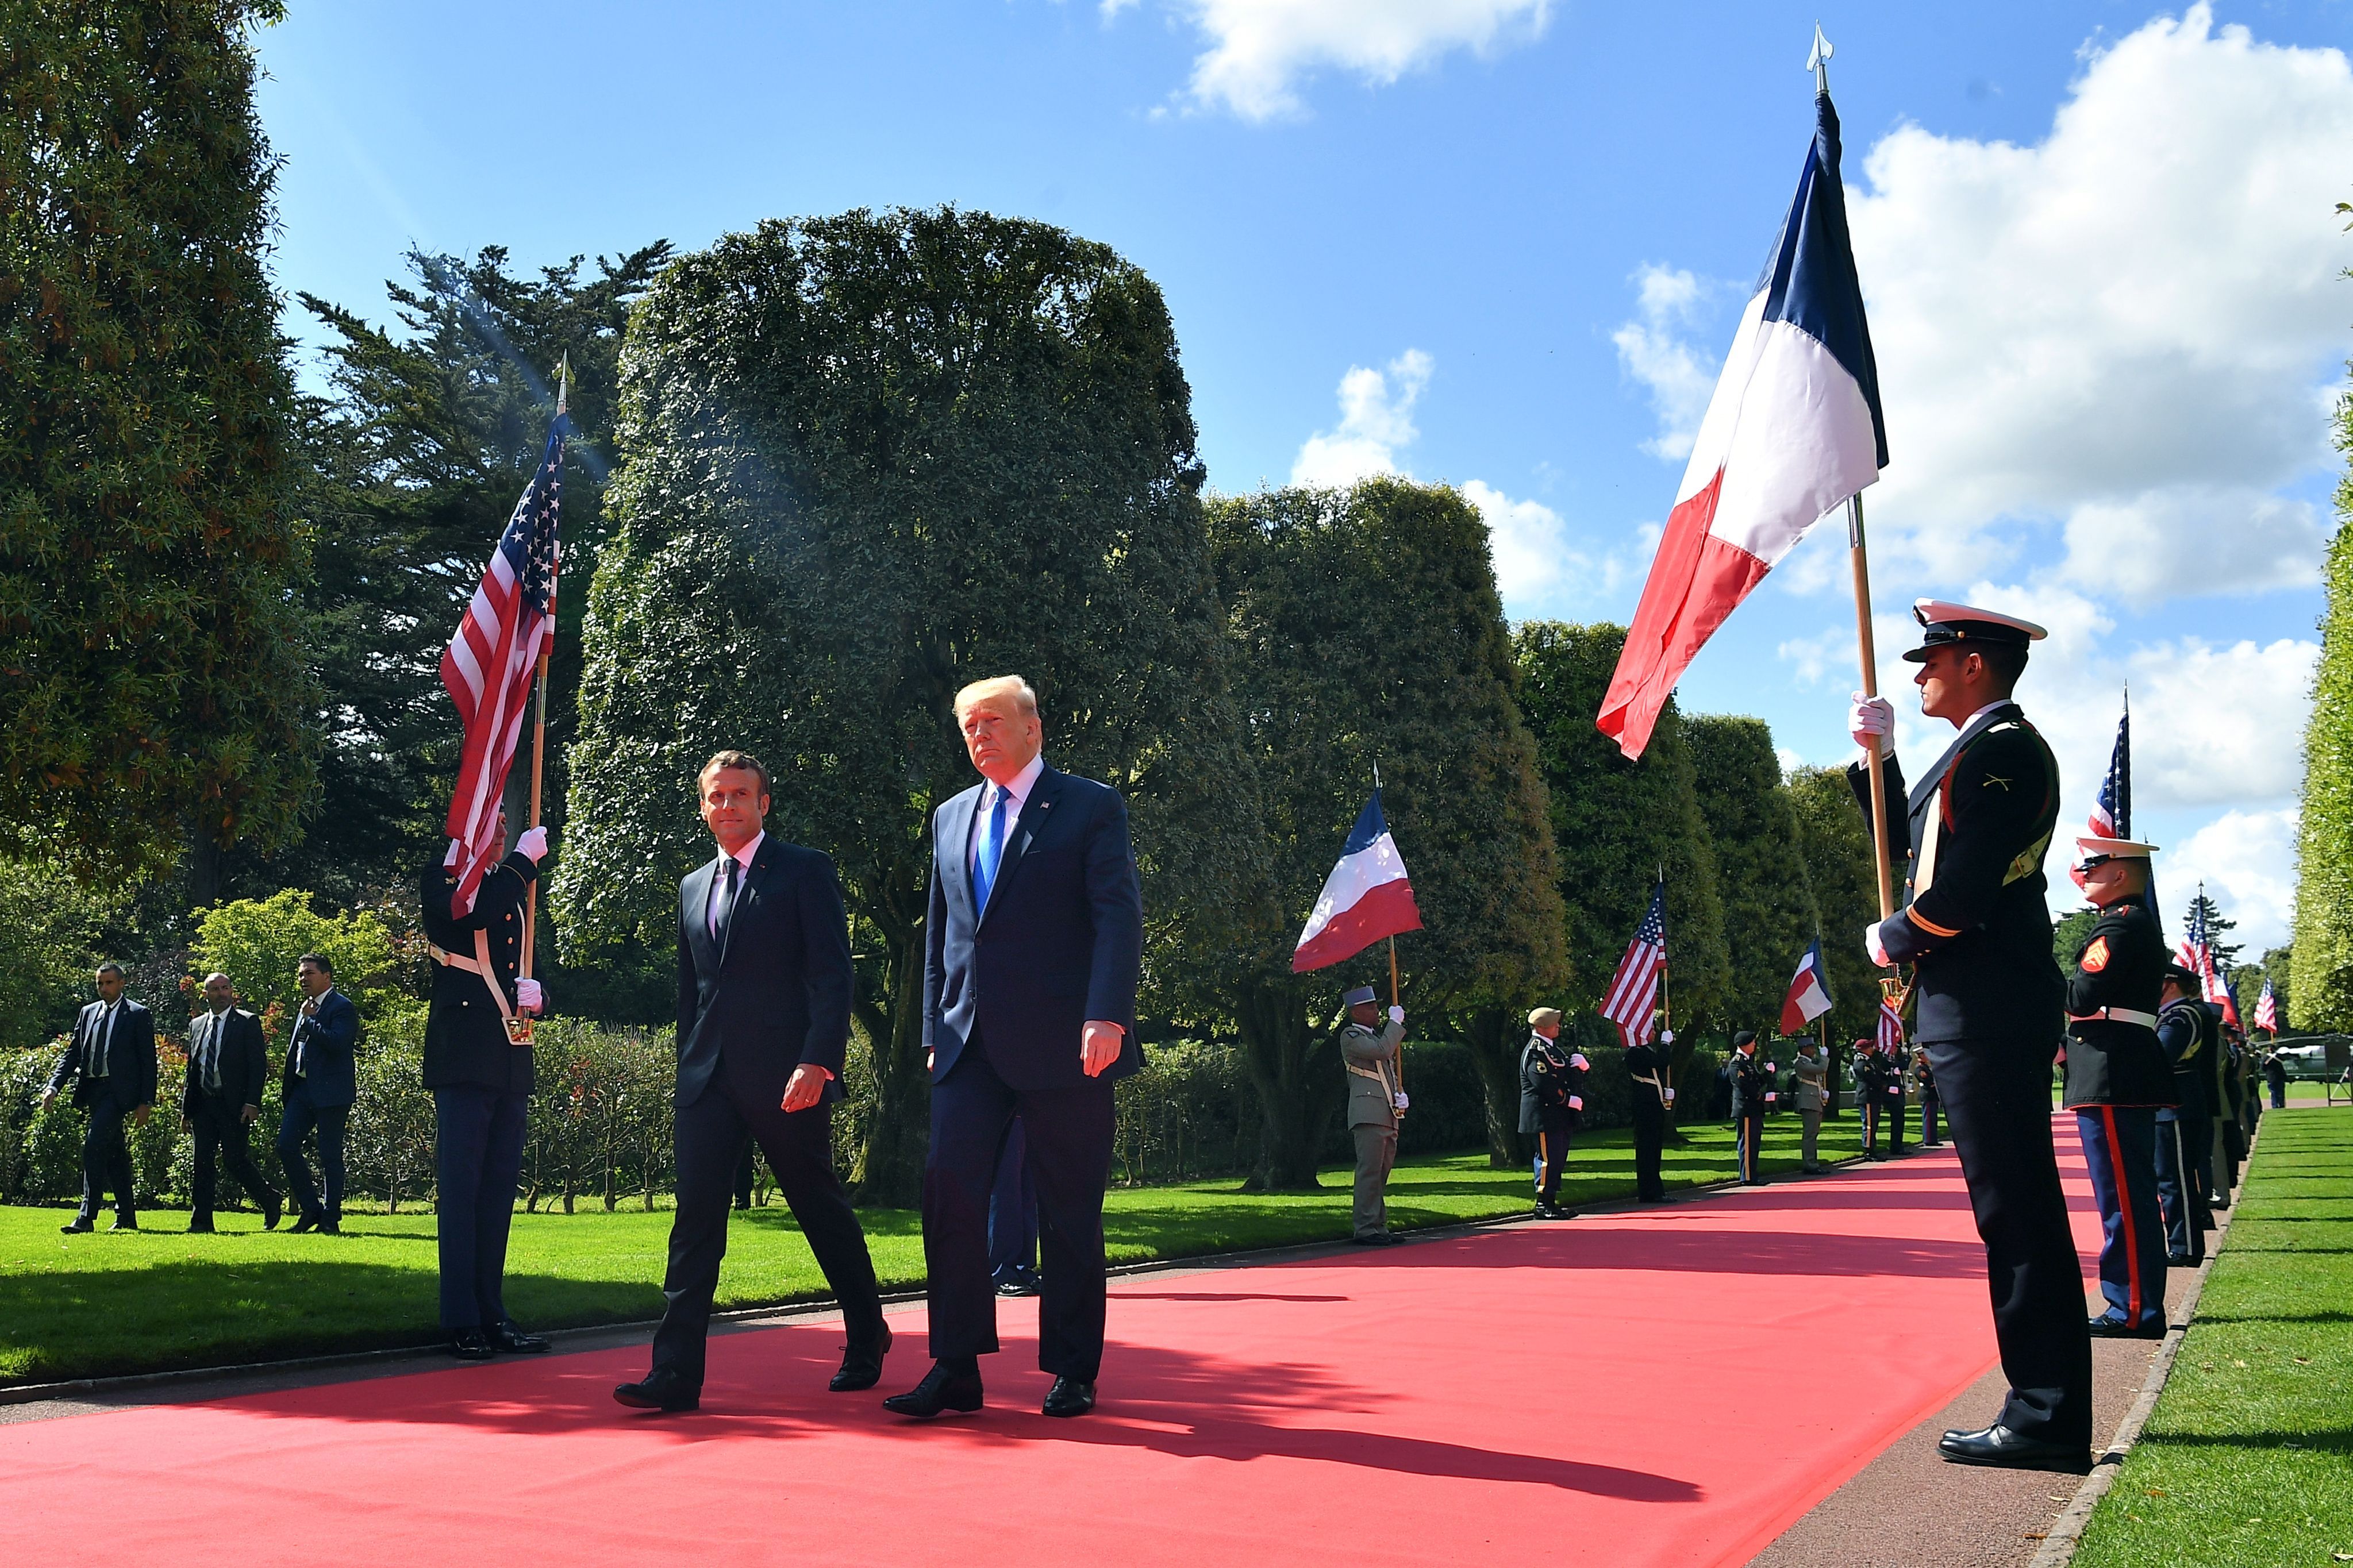 French President Emmanuel Macron (L) and US President Donald Trump walk on the red carpet.